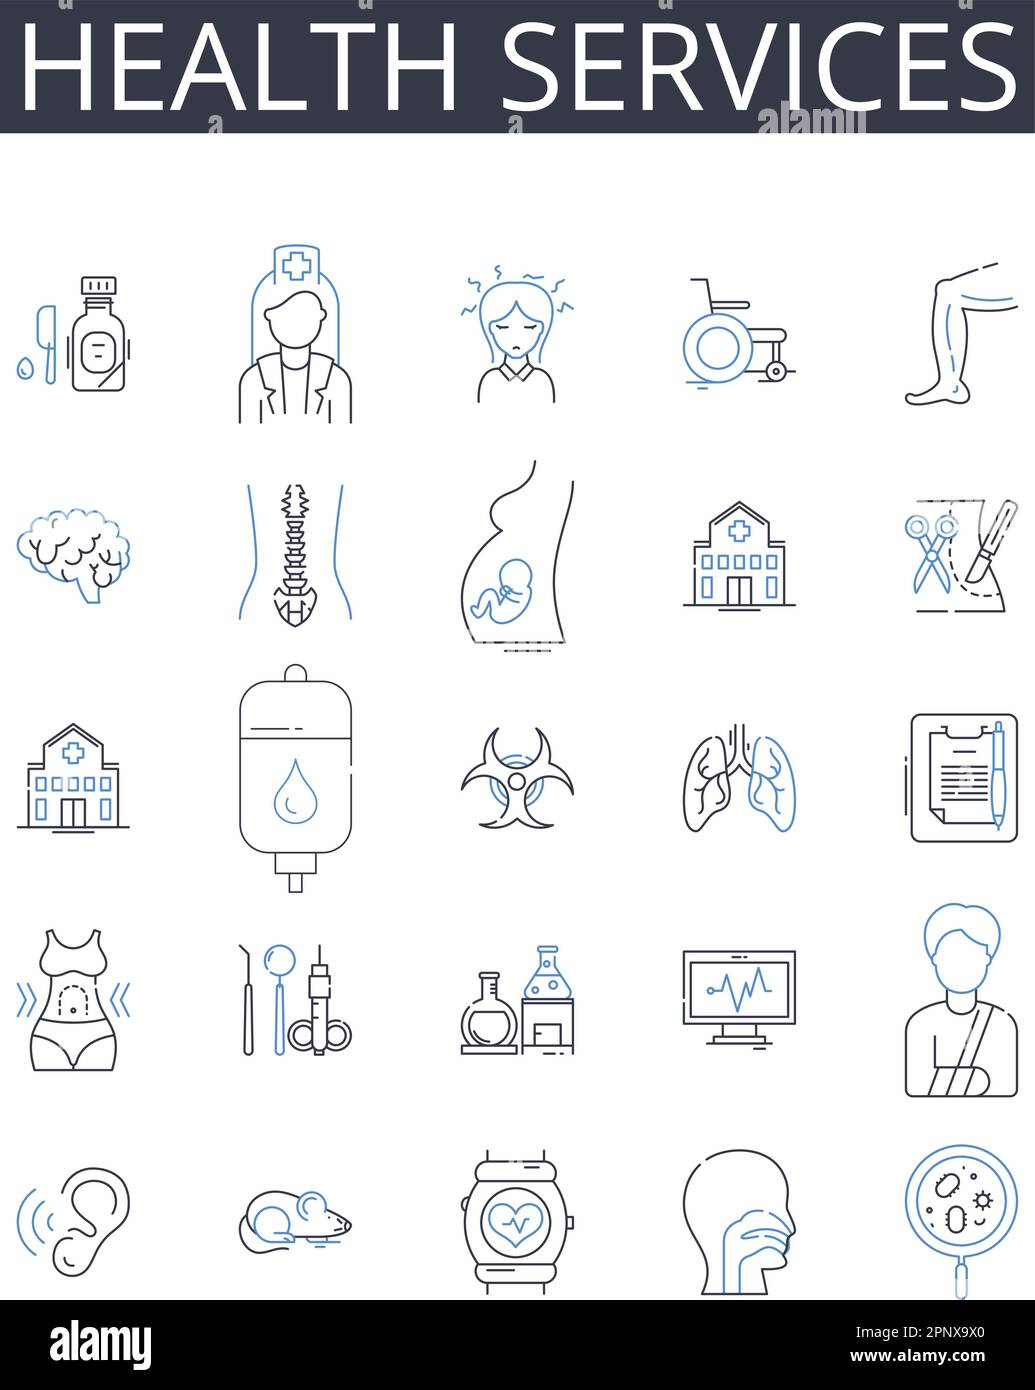 Health services line icons collection. Medical care, Wellness facilities, Healthcare institutions, Physical therapy, Healthcare providers, Holistic Stock Vector